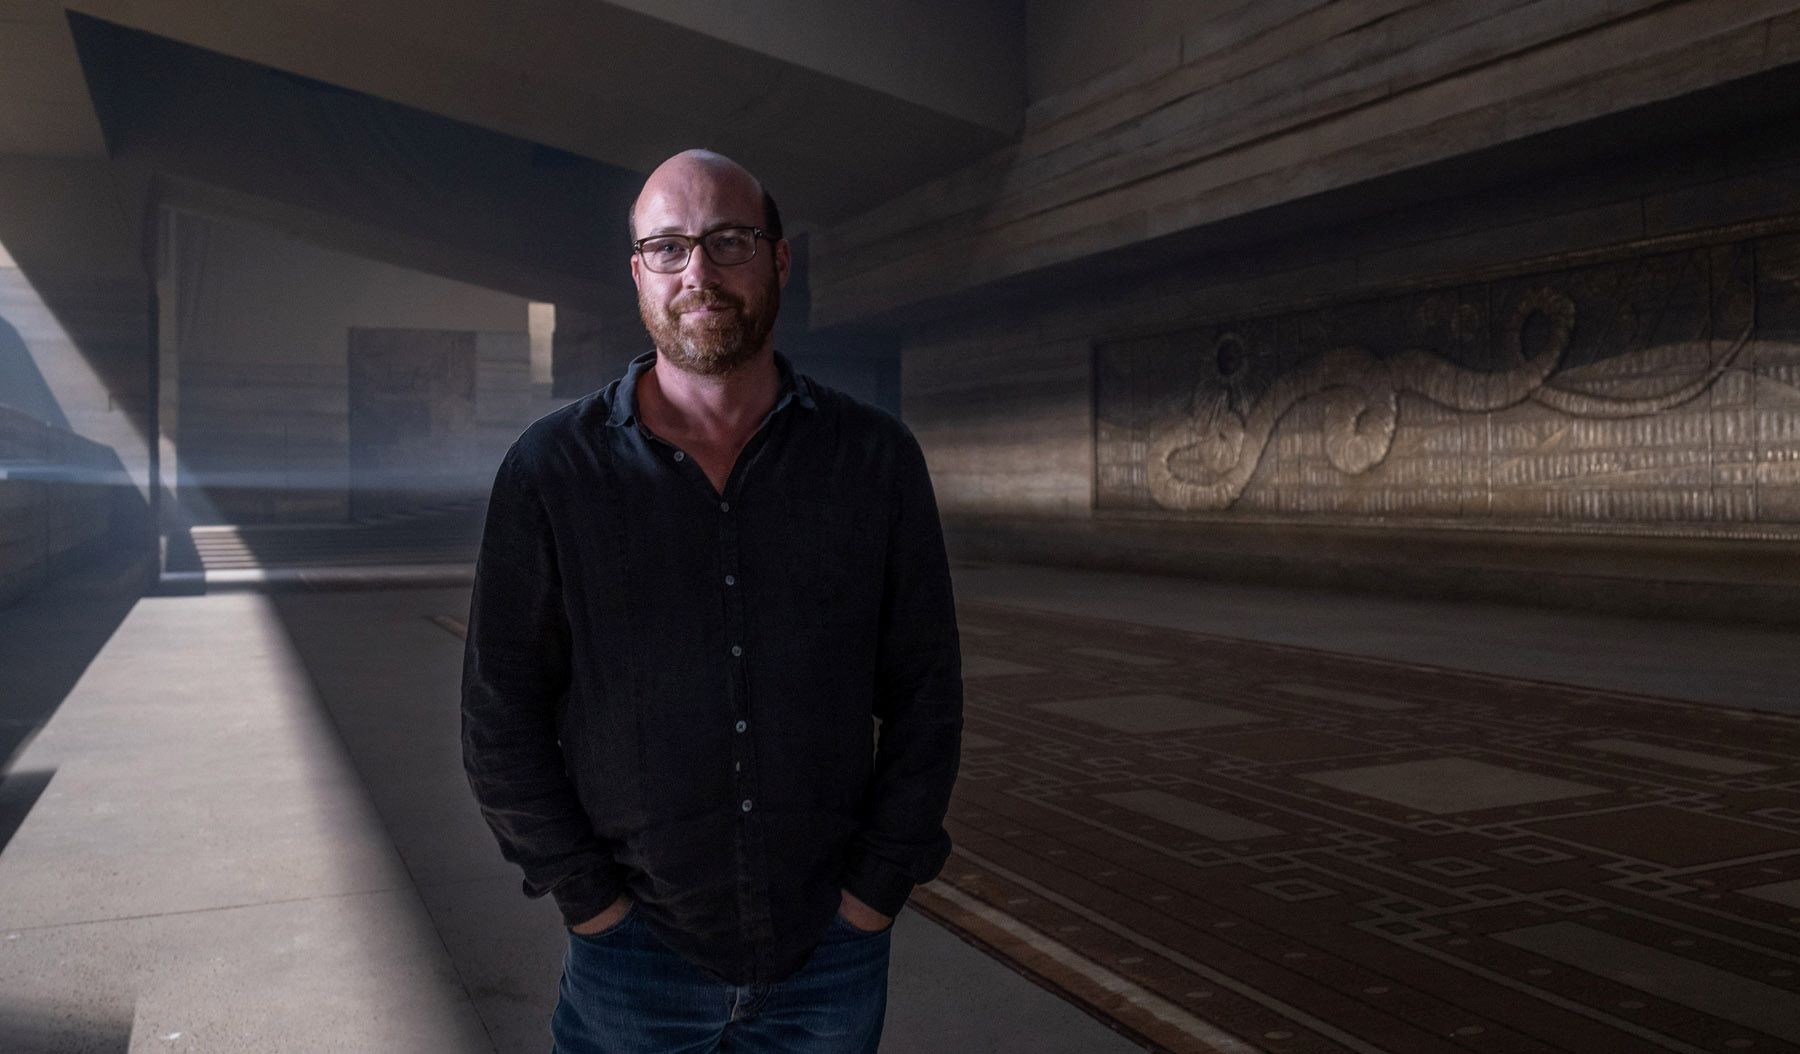 In a spacious, dimly-lit interior, a man in a black shirt stands confidently with hands in pockets, with striking beams of light and intricate wall engravings forming a dramatic backdrop.